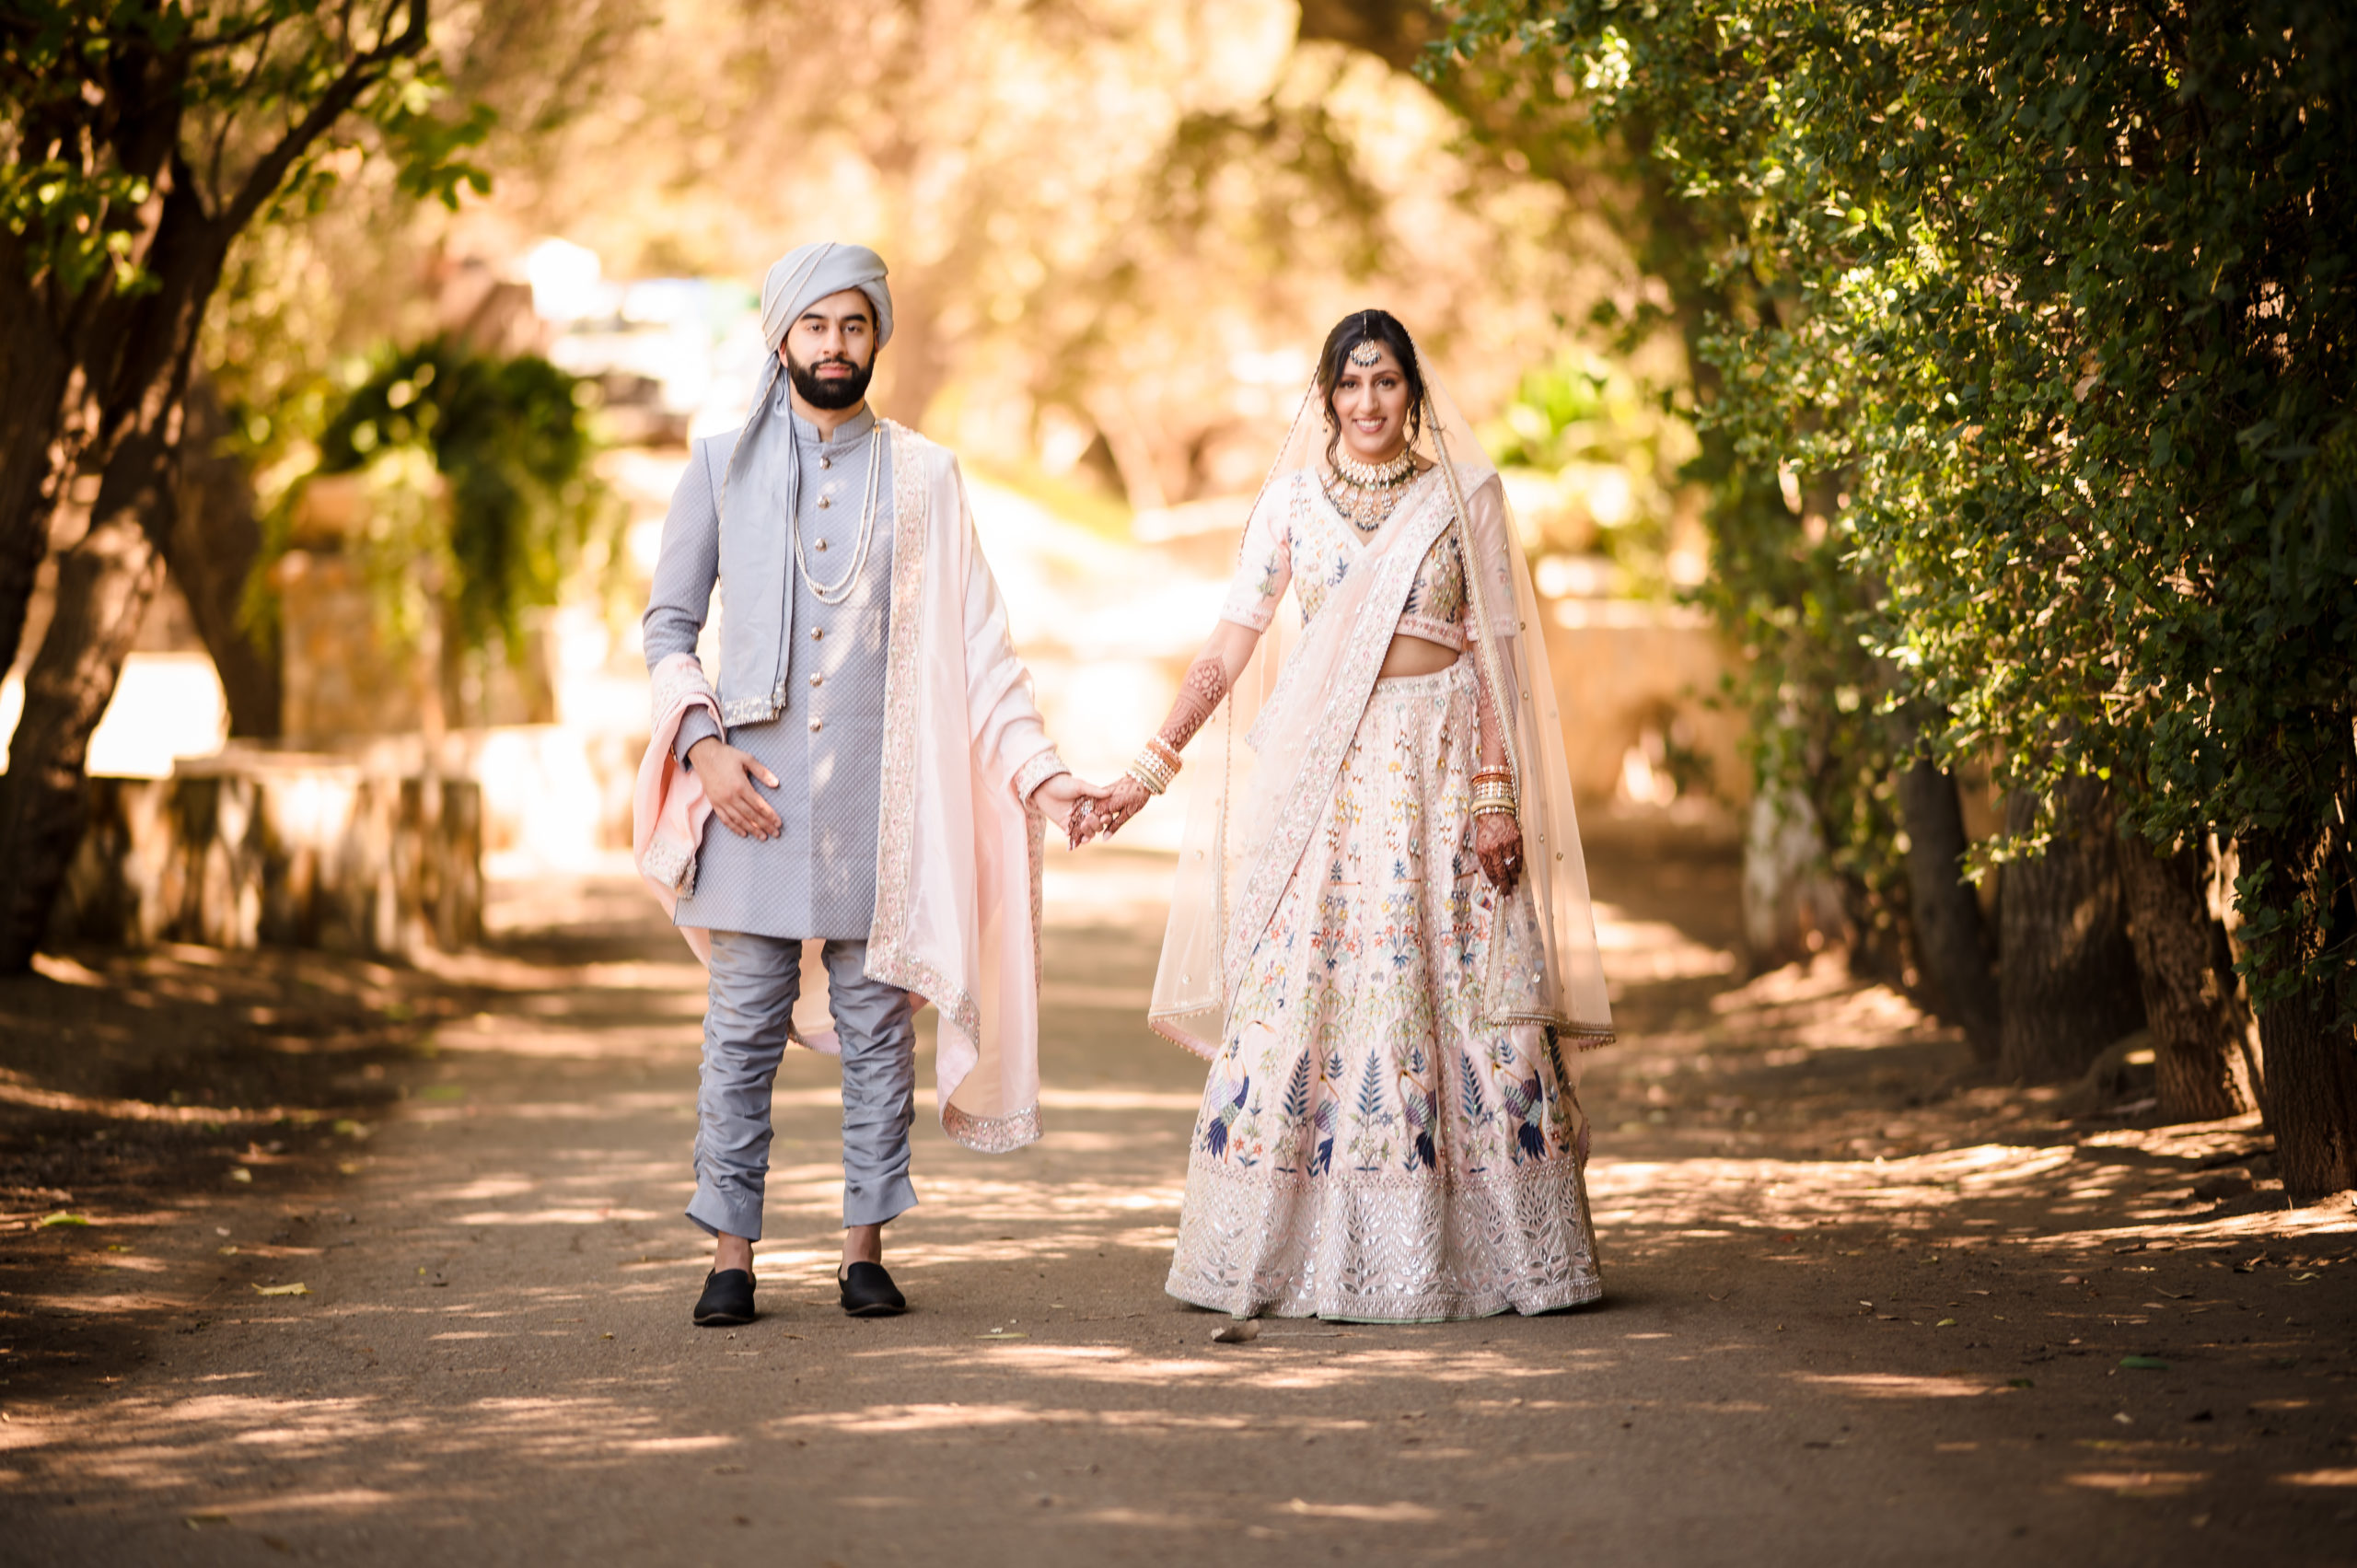 Indian bride with pink sari and groom with grey sherwani and